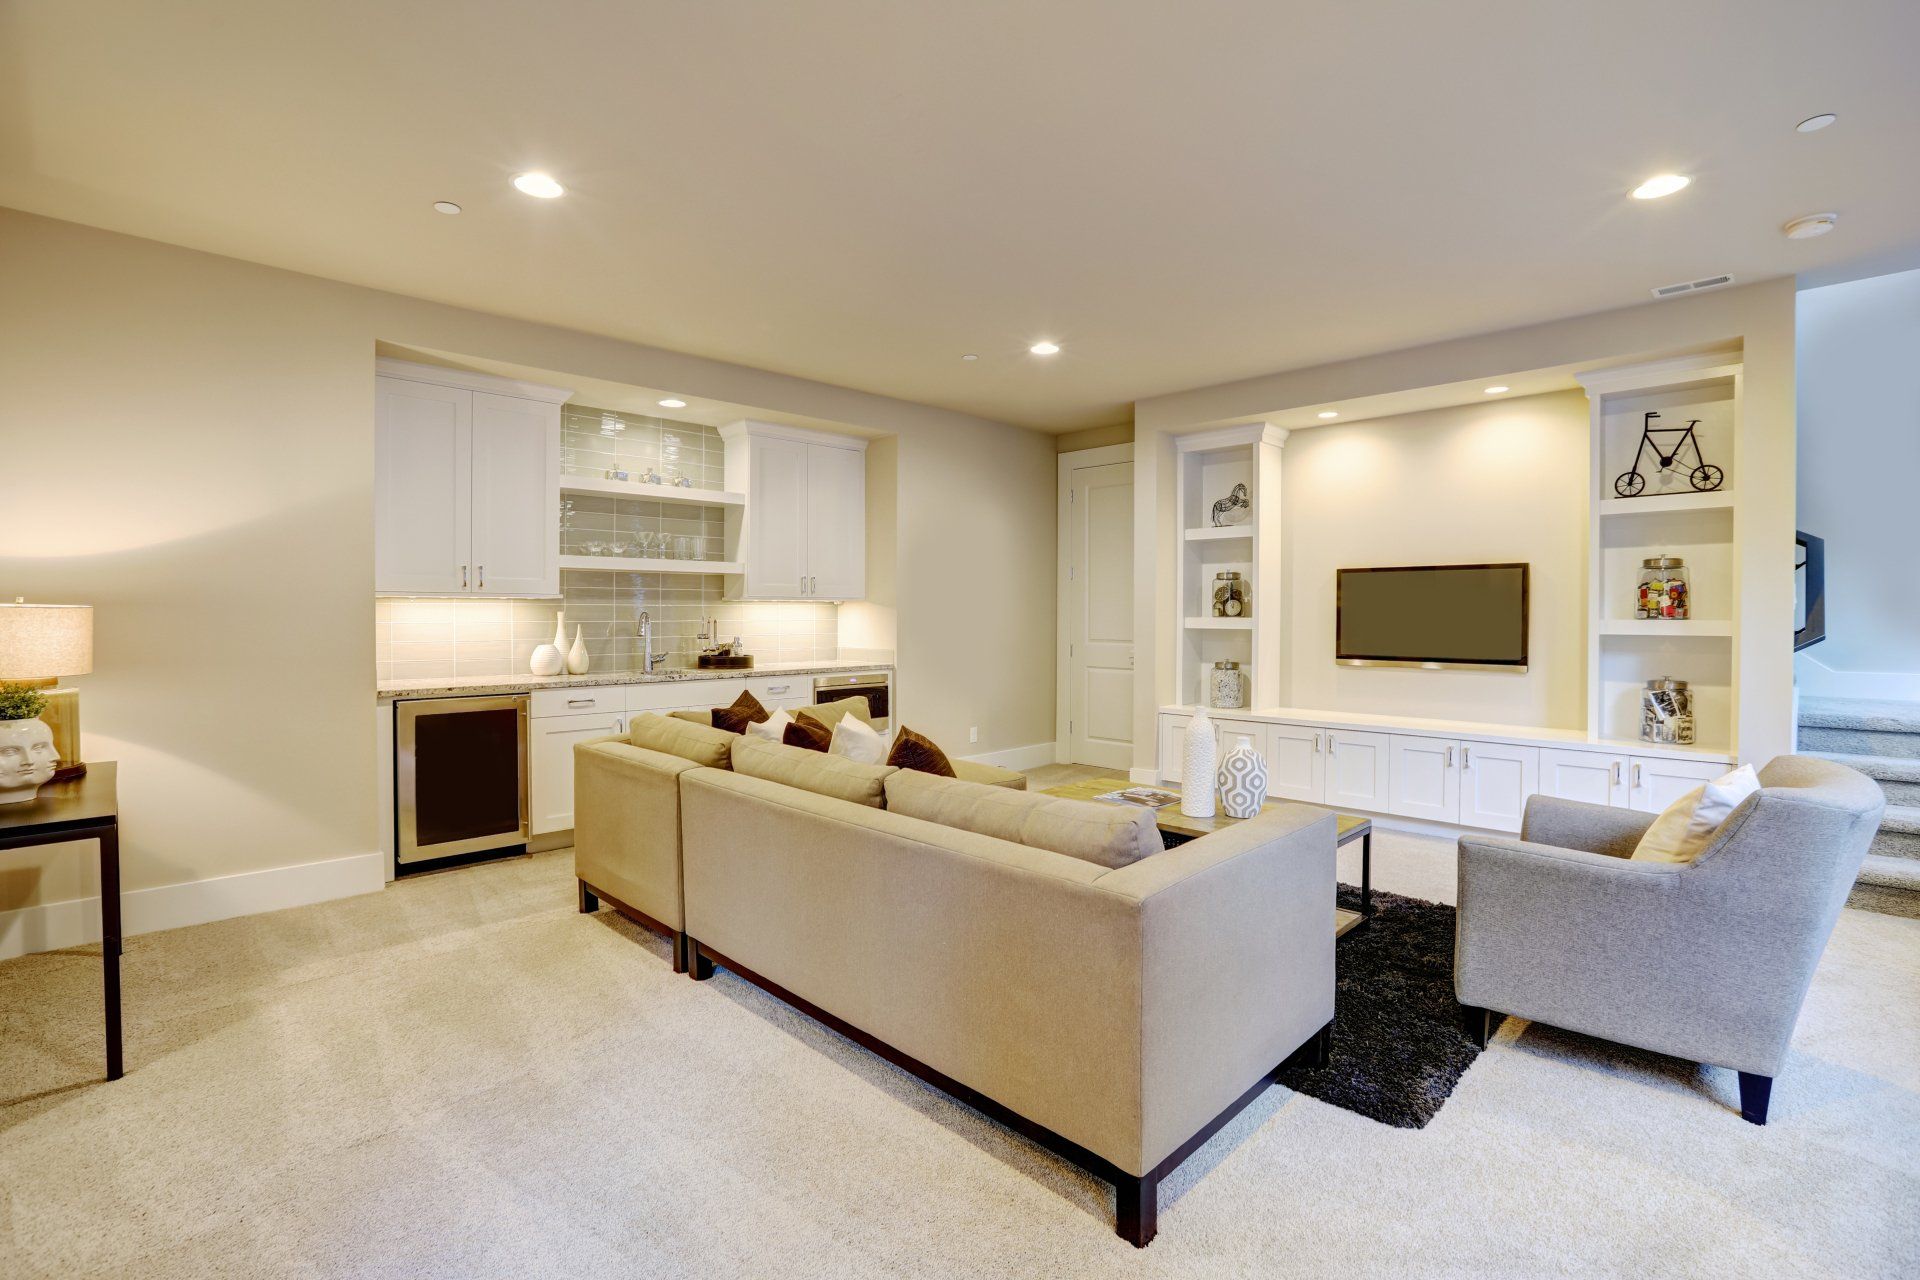 basement refinishing and remodeling contractors in MA and CT